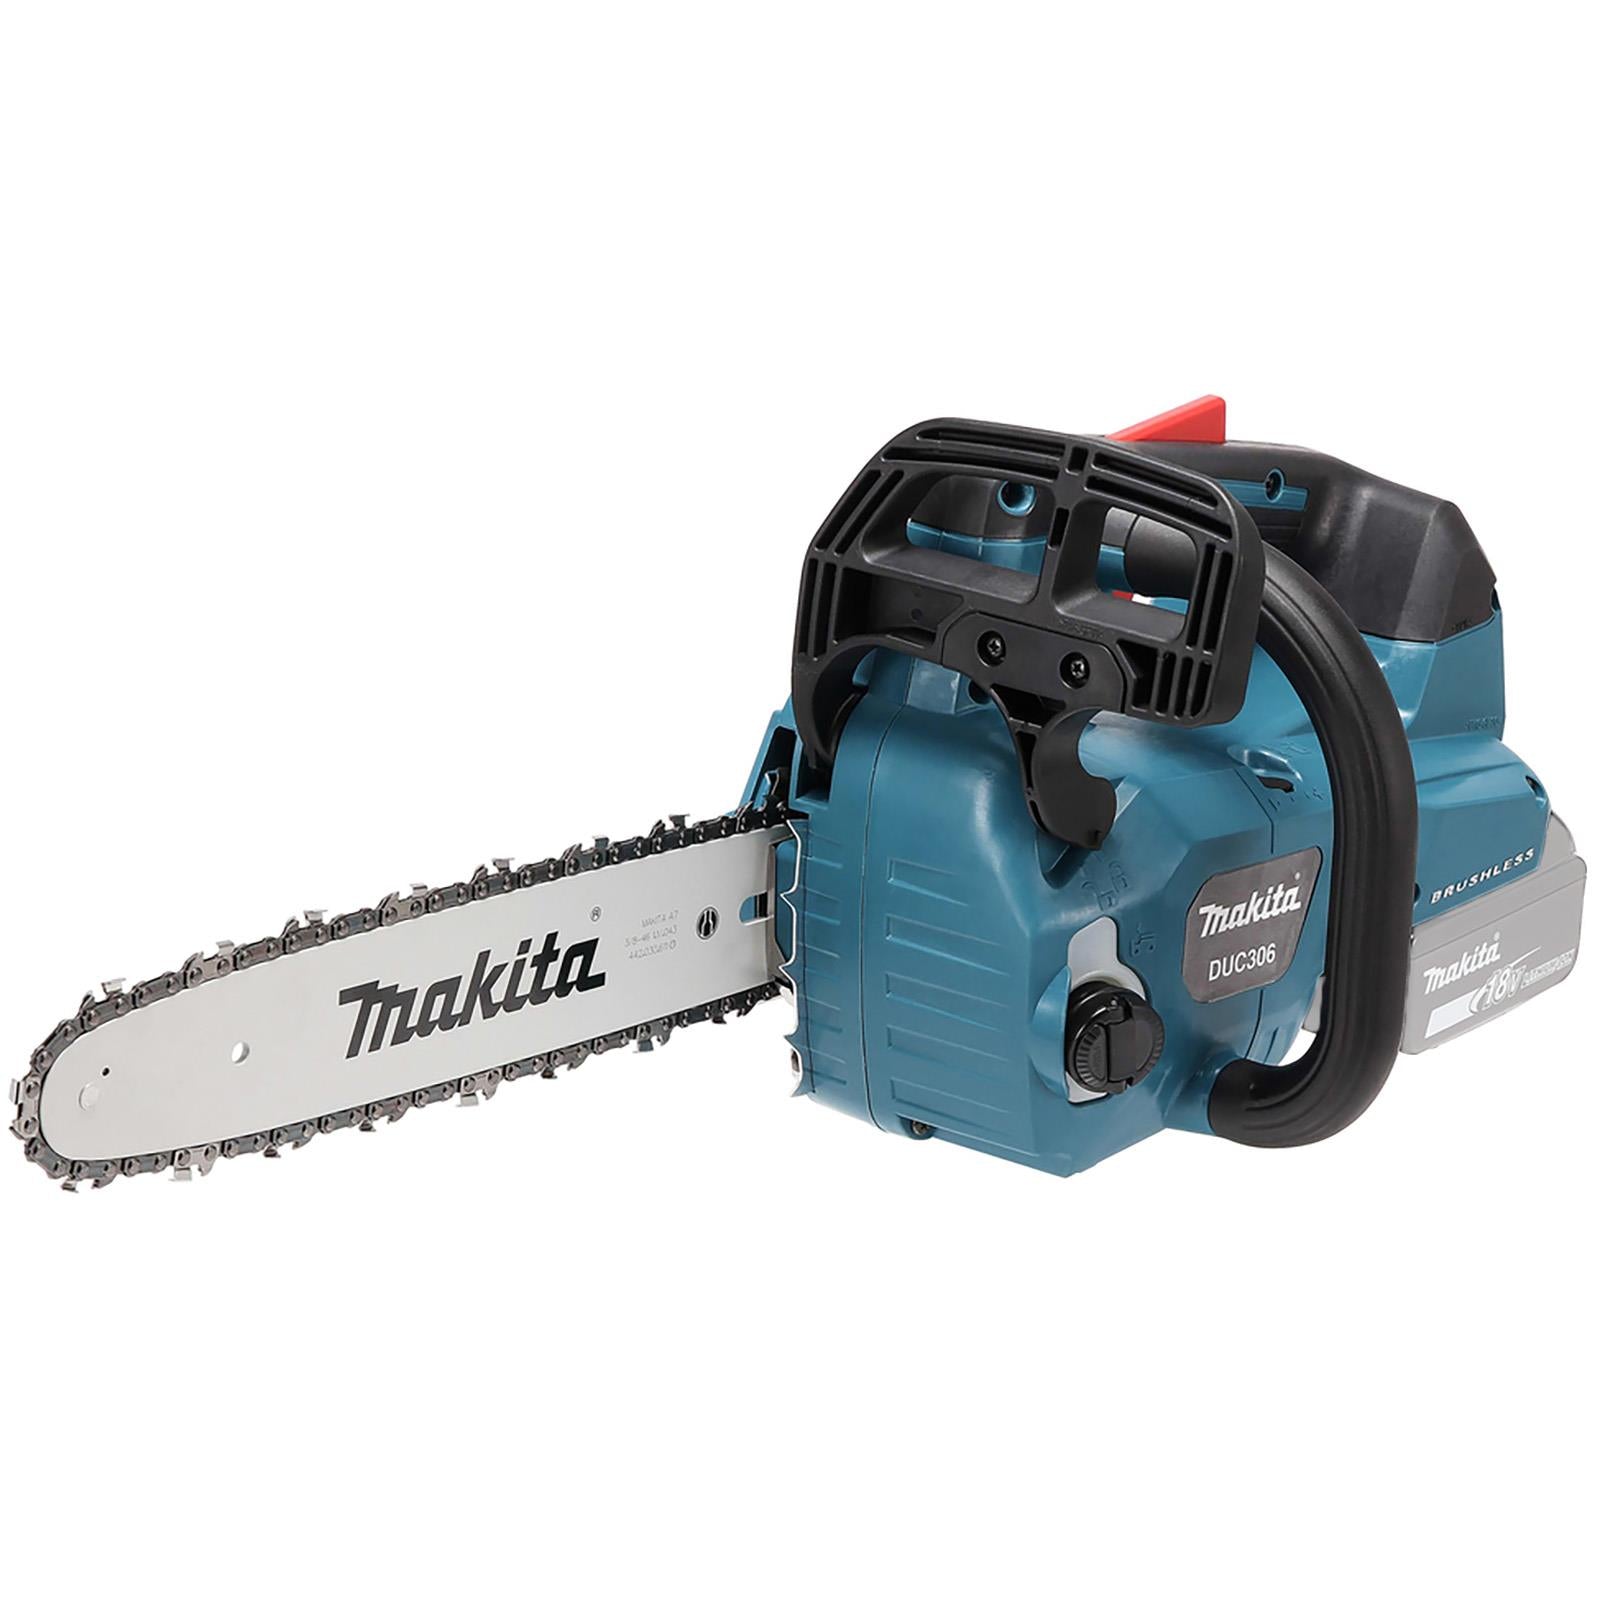 Makita Chainsaw 30cm 12" 18V x 2 LXT Brushless Cordless Top Handle Garden Tree Cutting Pruning Bare Unit Body Only DUC306PT2